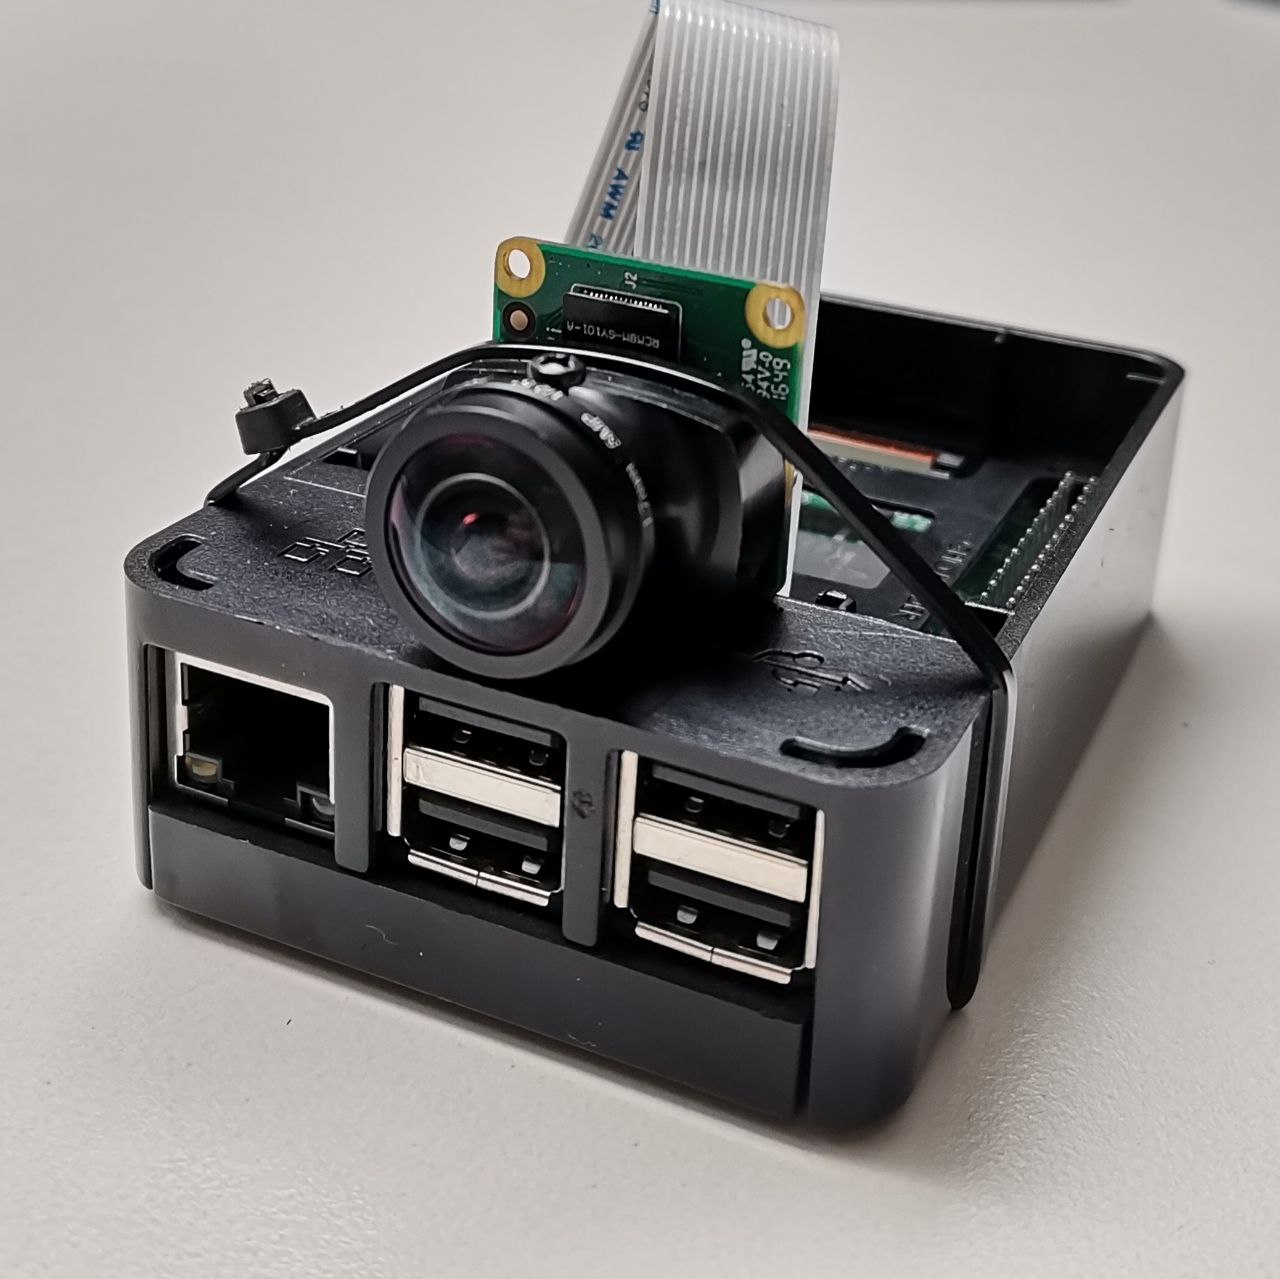 Streaming video from a Raspberry Pi Cam using a distributed ROS system